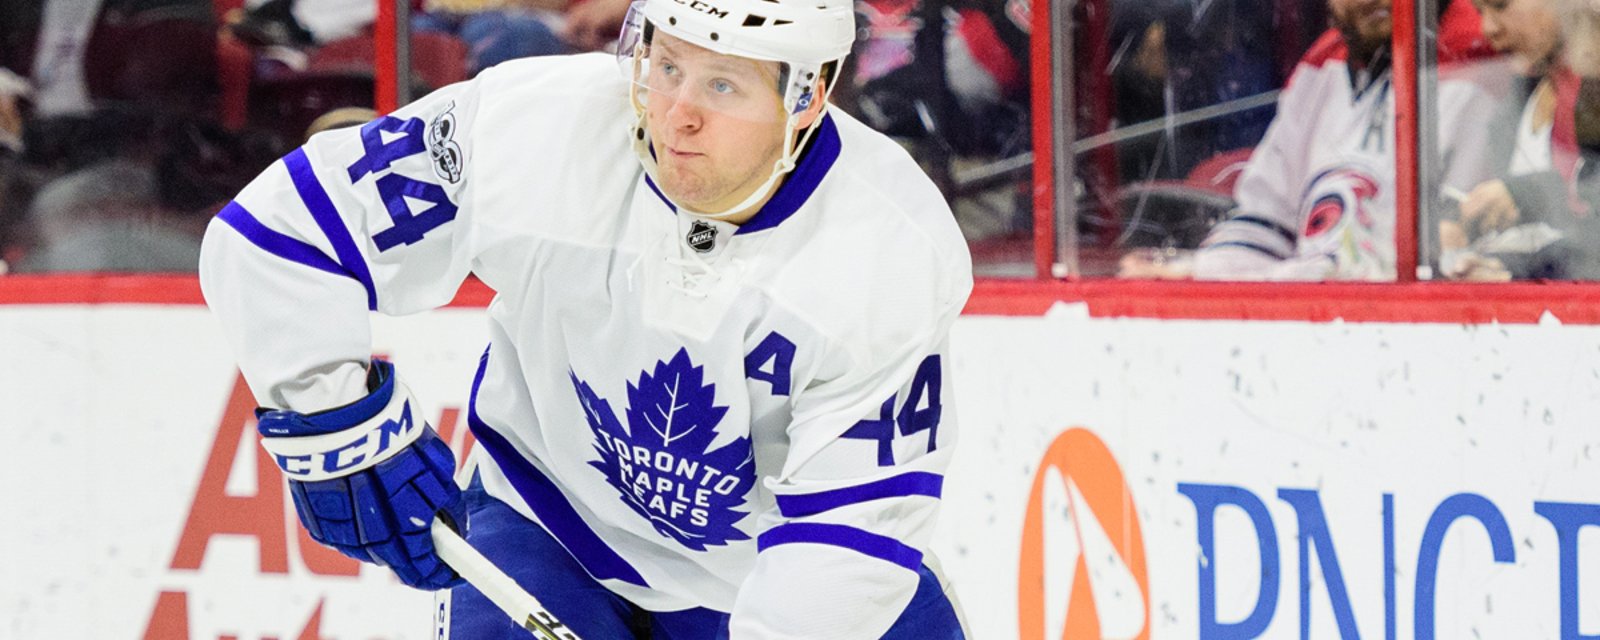 Rielly to finally explode offensively?